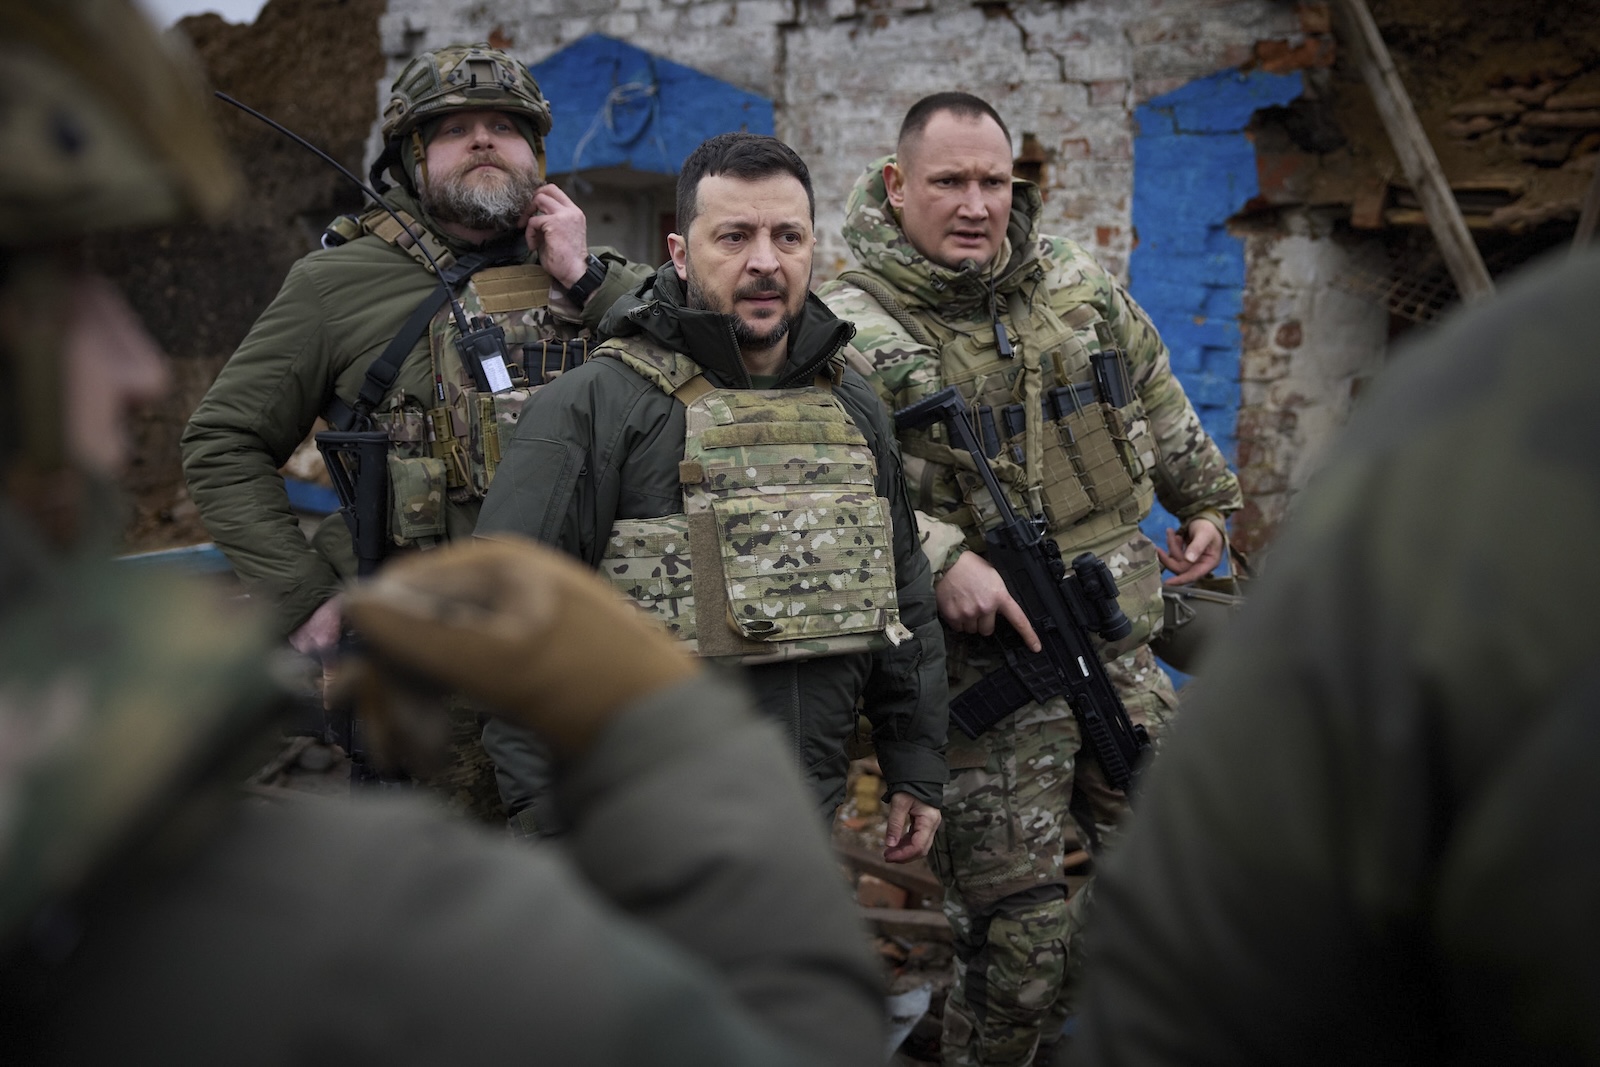 epa11126083 A handout photo made available by the Ukrainian Presidential Press Service shows Ukraine's President Volodymyr Zelensky (C) during a visit to frontline positions near Robotyne village, Zaporizhzhia region, southeastern Ukraine, 04 February 2024, amid the Russian invasion. According to the presidential office, Zelensky, during a working trip to the Zaporizhzhia region, visited Ukrainian soldiers near the frontline village of Robotyne and handed them state awards. Russian troops entered Ukrainian territory on 24 February 2022, starting a conflict that has provoked destruction and a humanitarian crisis.  EPA/UKRAINIAN PRESIDENTIAL PRESS SERVICE HANDOUT -- MANDATORY CREDIT: UKRAINIAN PRESIDENTIAL PRESS SERVICE --  HANDOUT EDITORIAL USE ONLY/NO SALES HANDOUT EDITORIAL USE ONLY/NO SALES